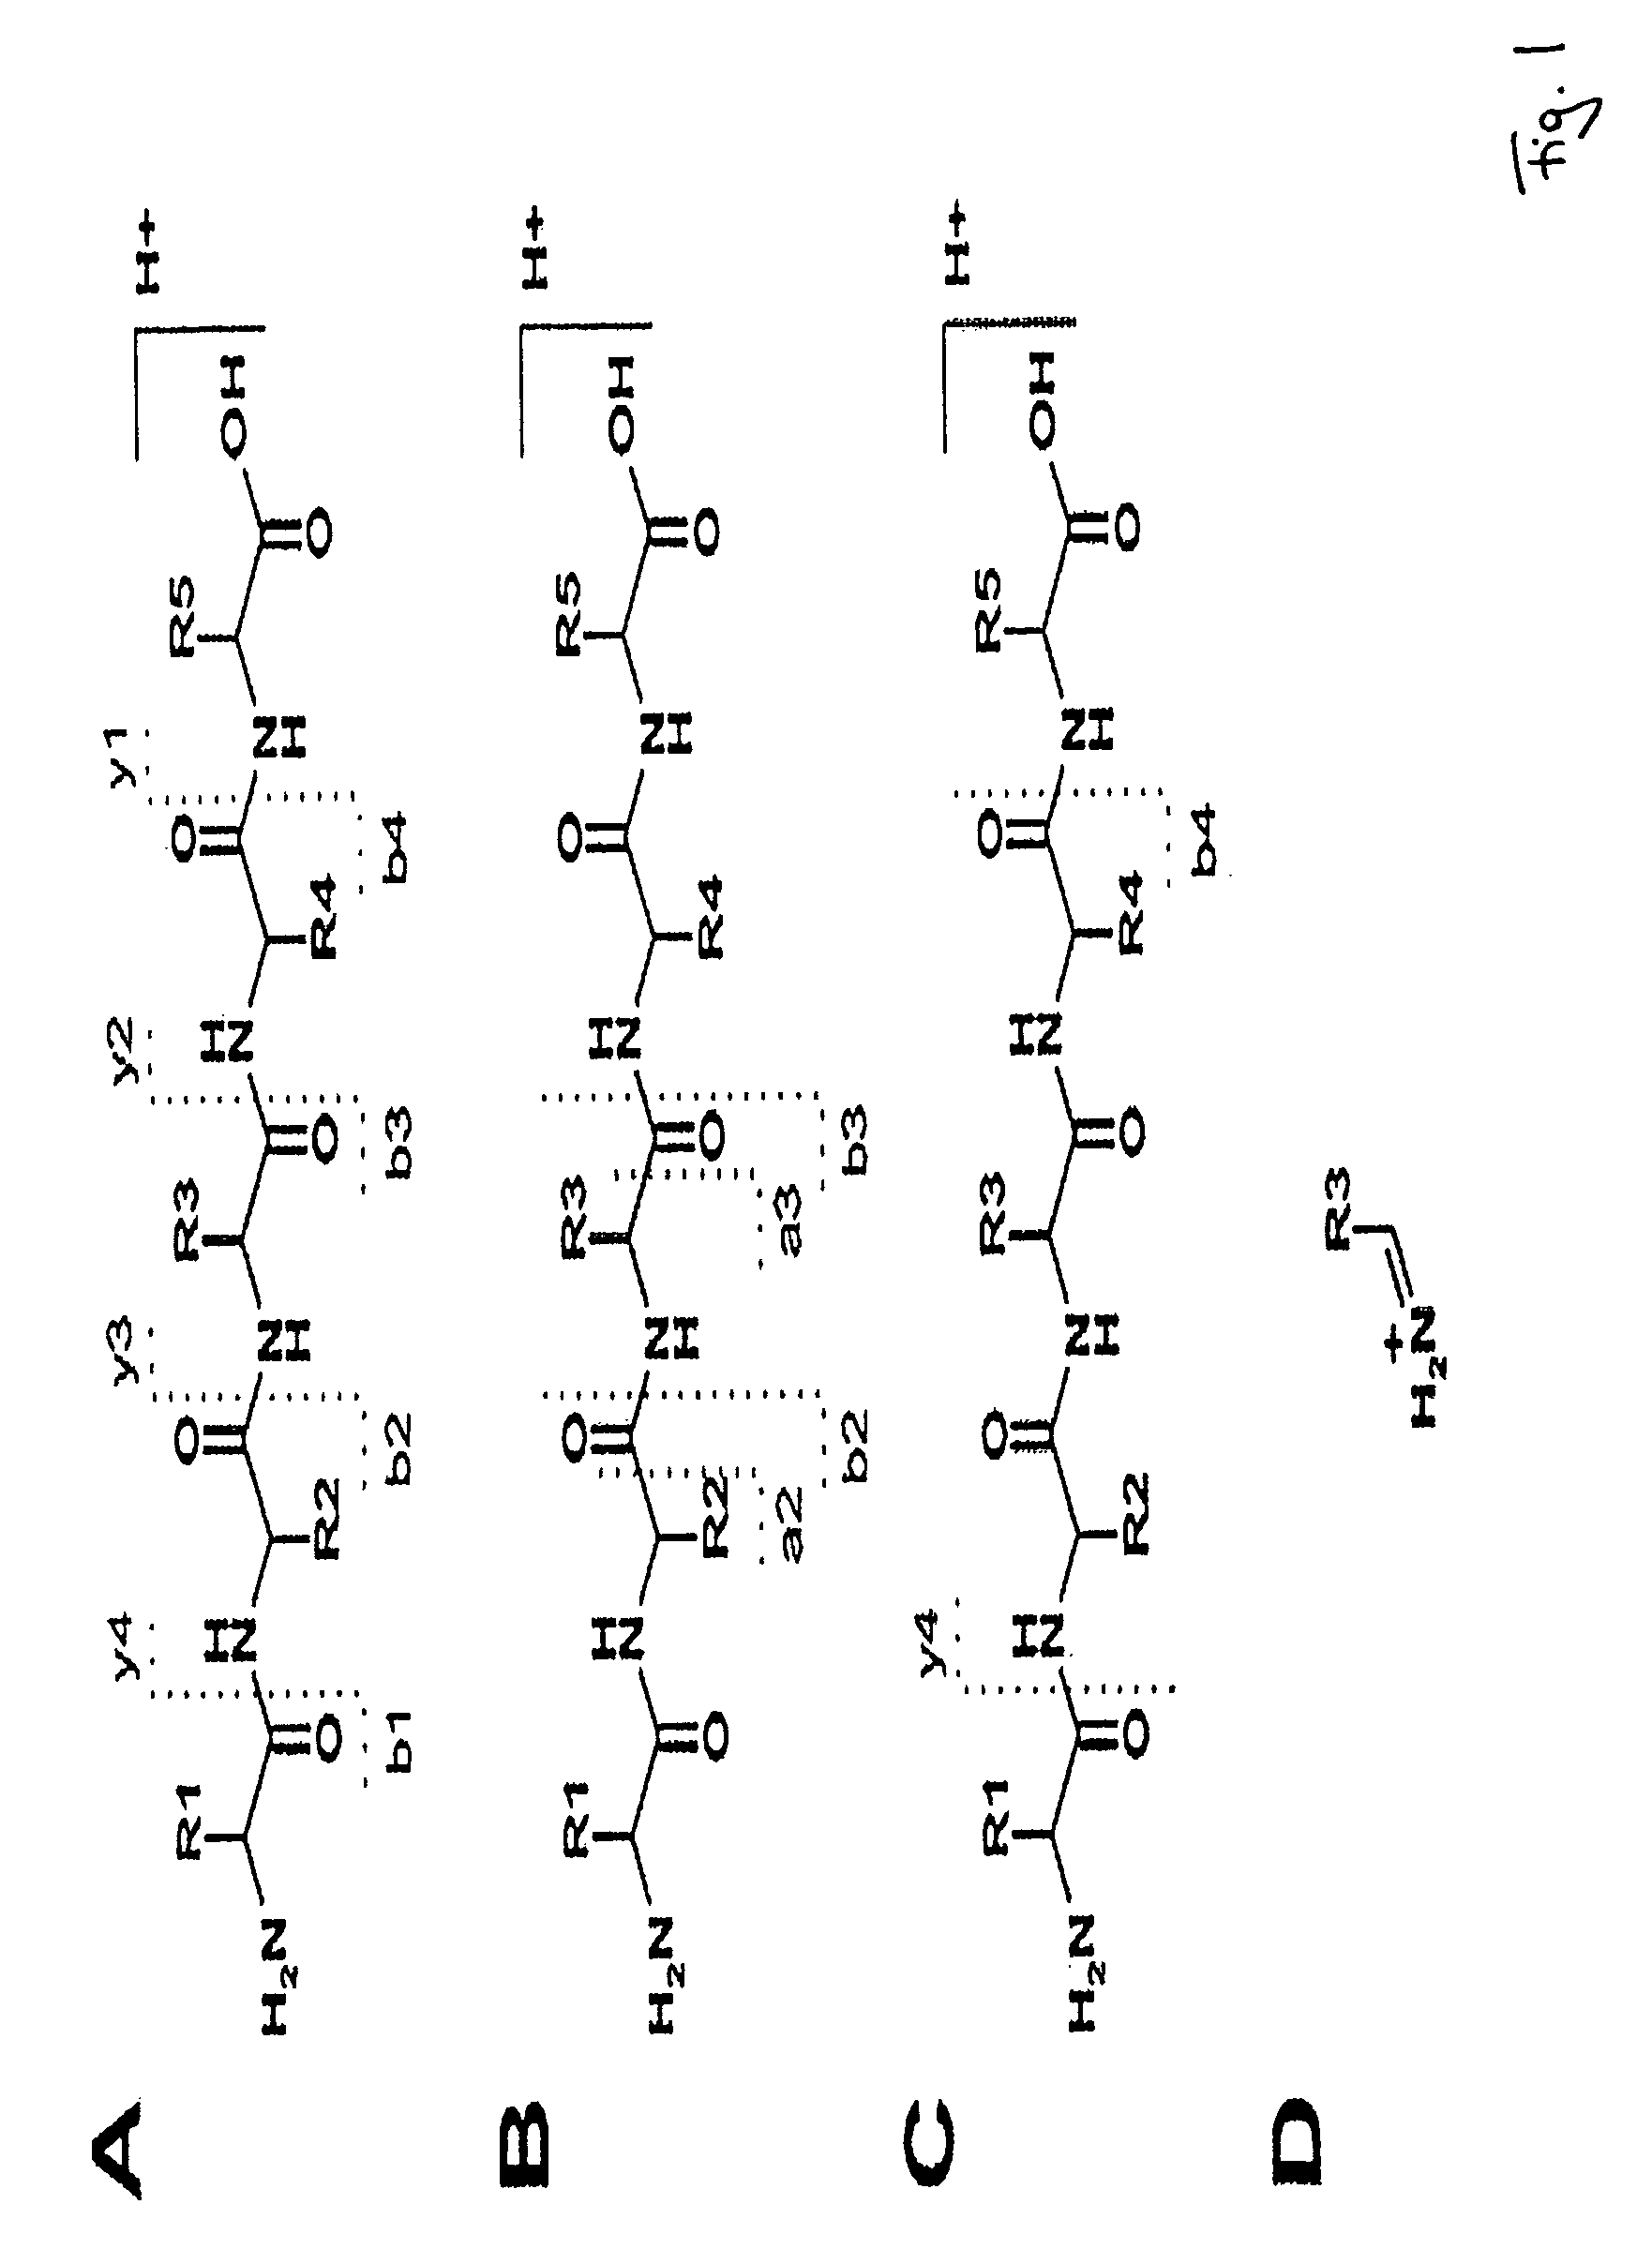 Peptide sequencing from peptide fragmentation mass spectra